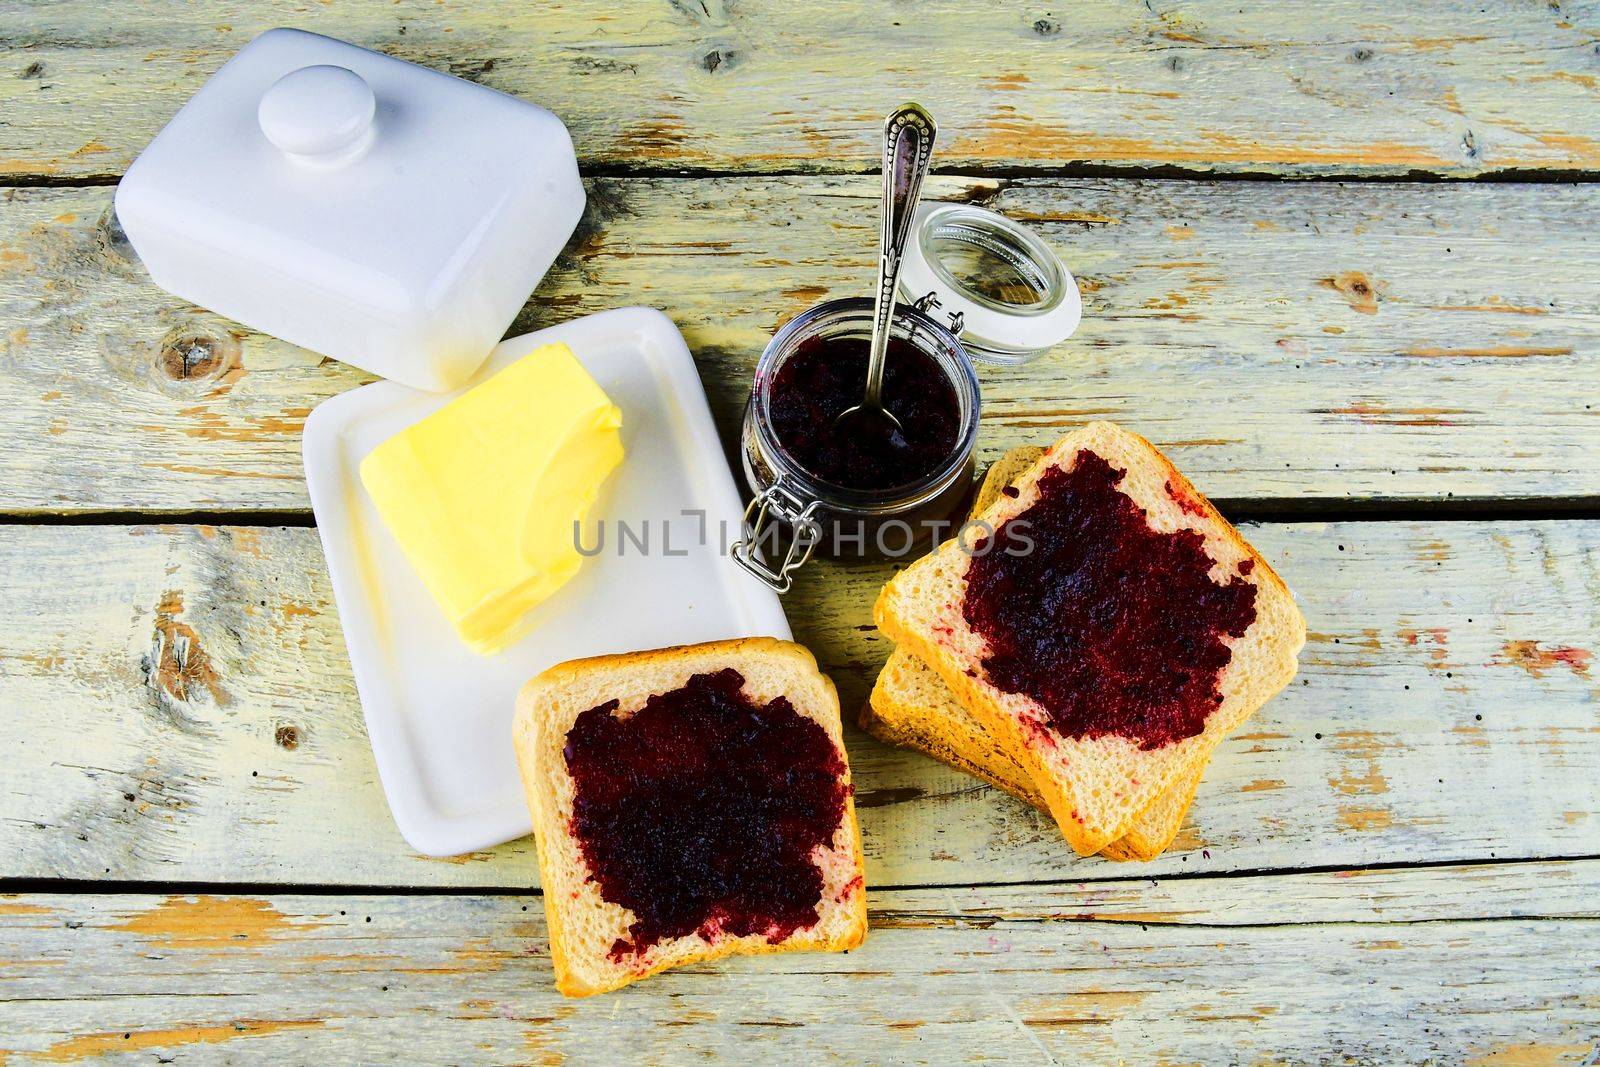 Jam, butter in butter dish and jam spread on toast. Healthy and diet concept. Rural white wooden background. Flat design, top view.